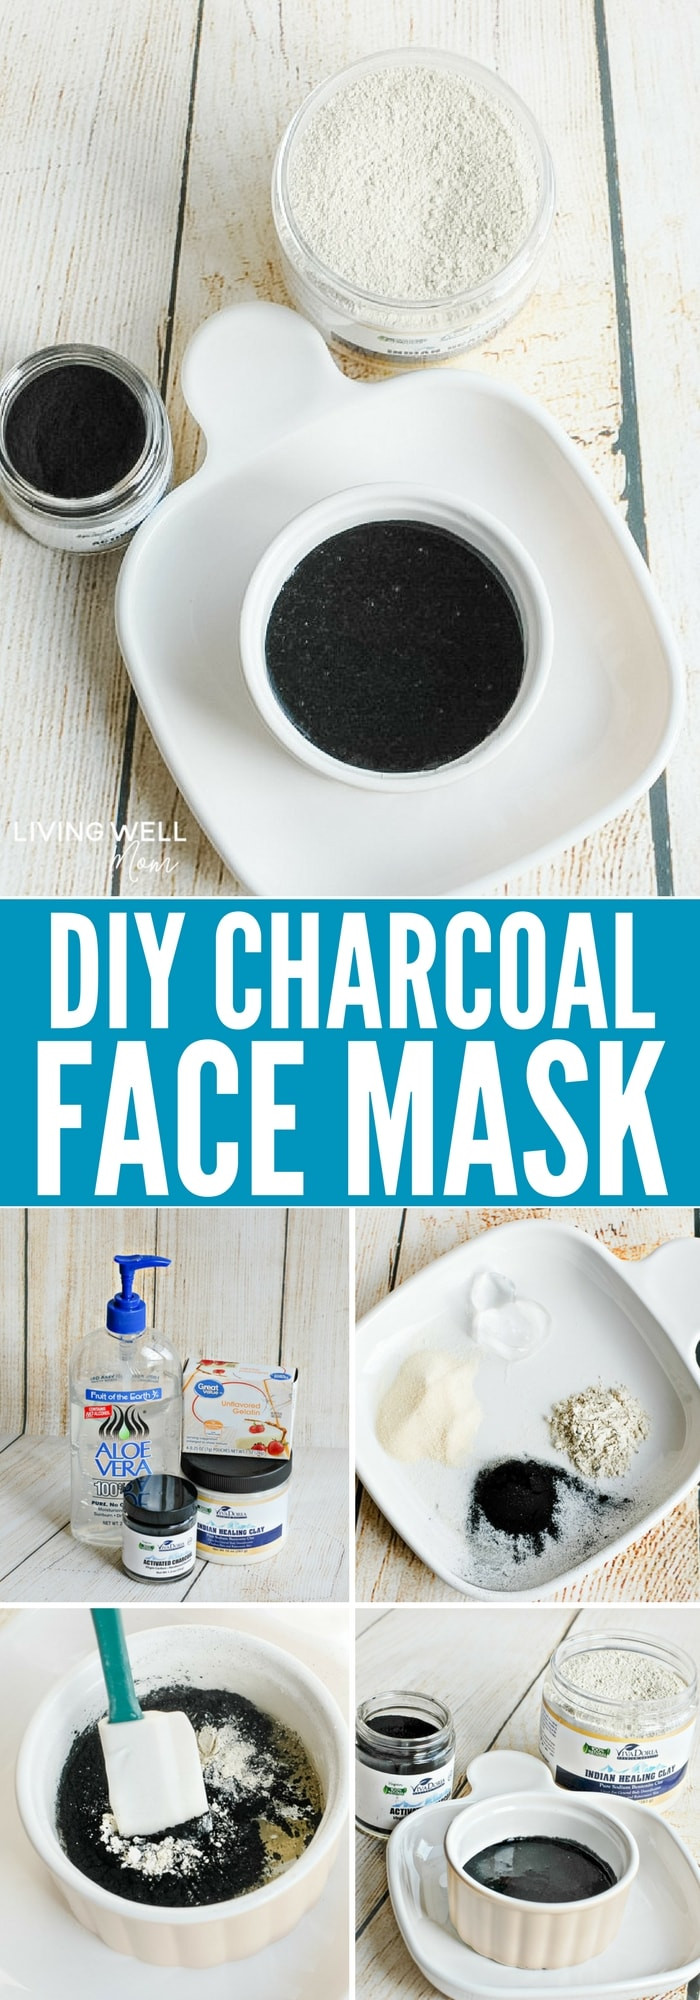 Charcoal Face Mask DIY
 DIY Charcoal Face Mask Recipe Living Well Mom